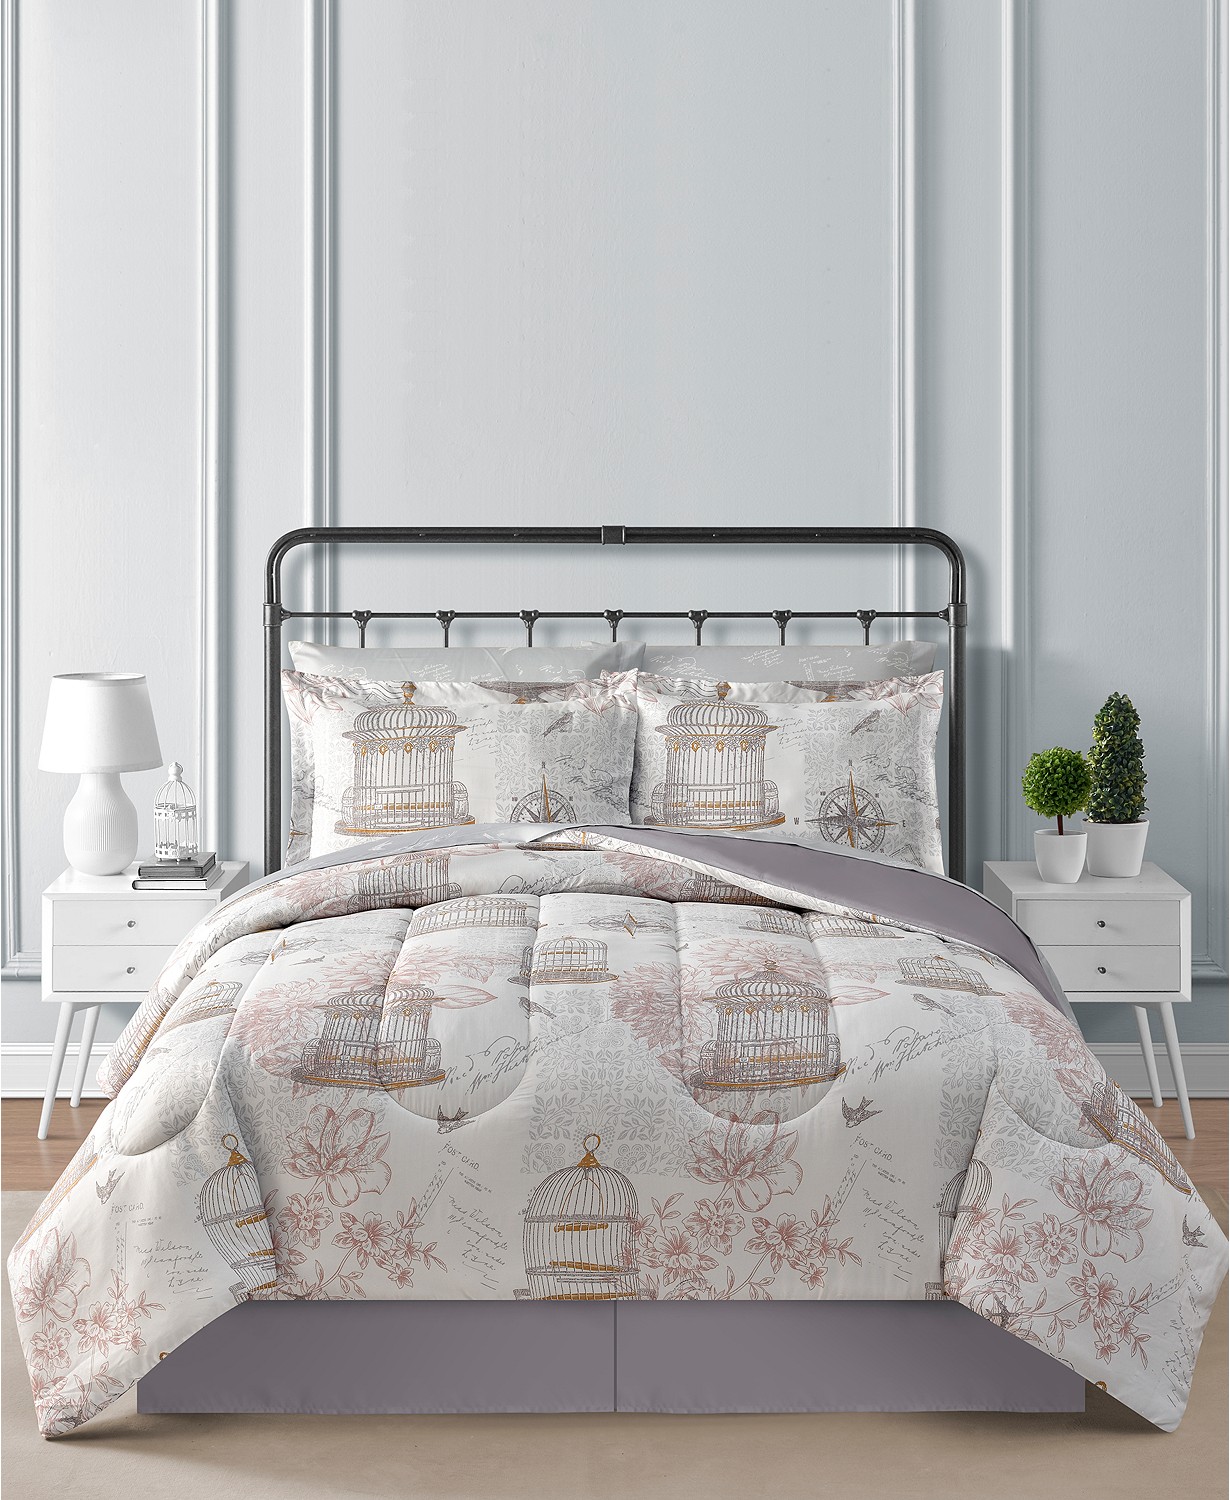 These $100 Bedding Sets Can Be Had For Under $30 At Macy’s Today | The Daily Caller